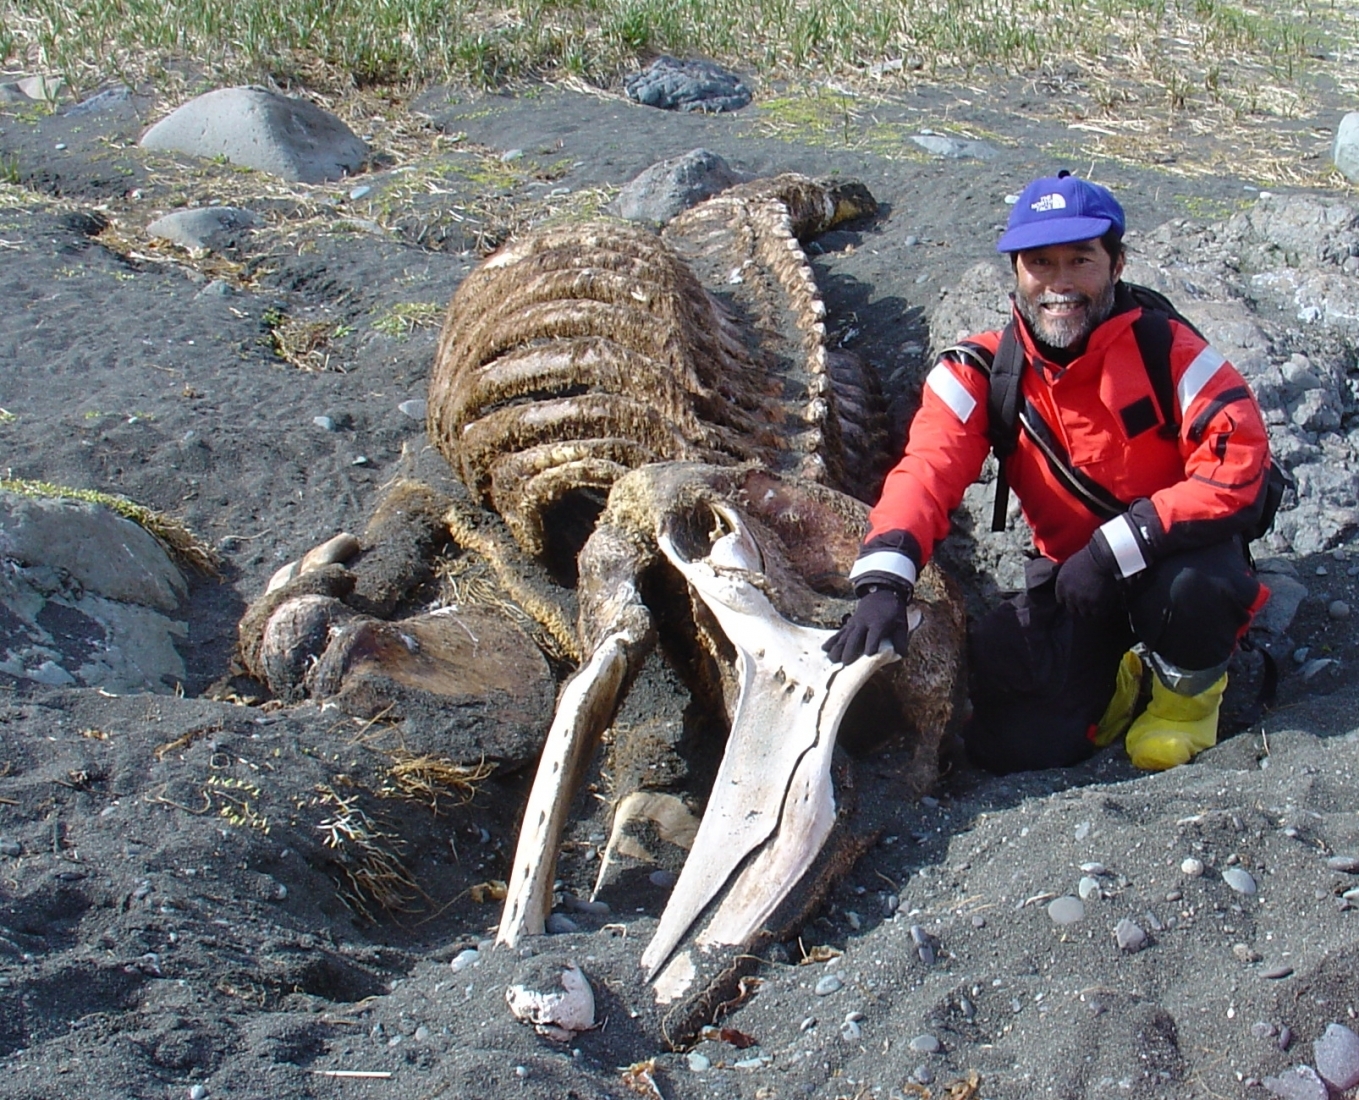 A man next to whale remains on a shoreline.